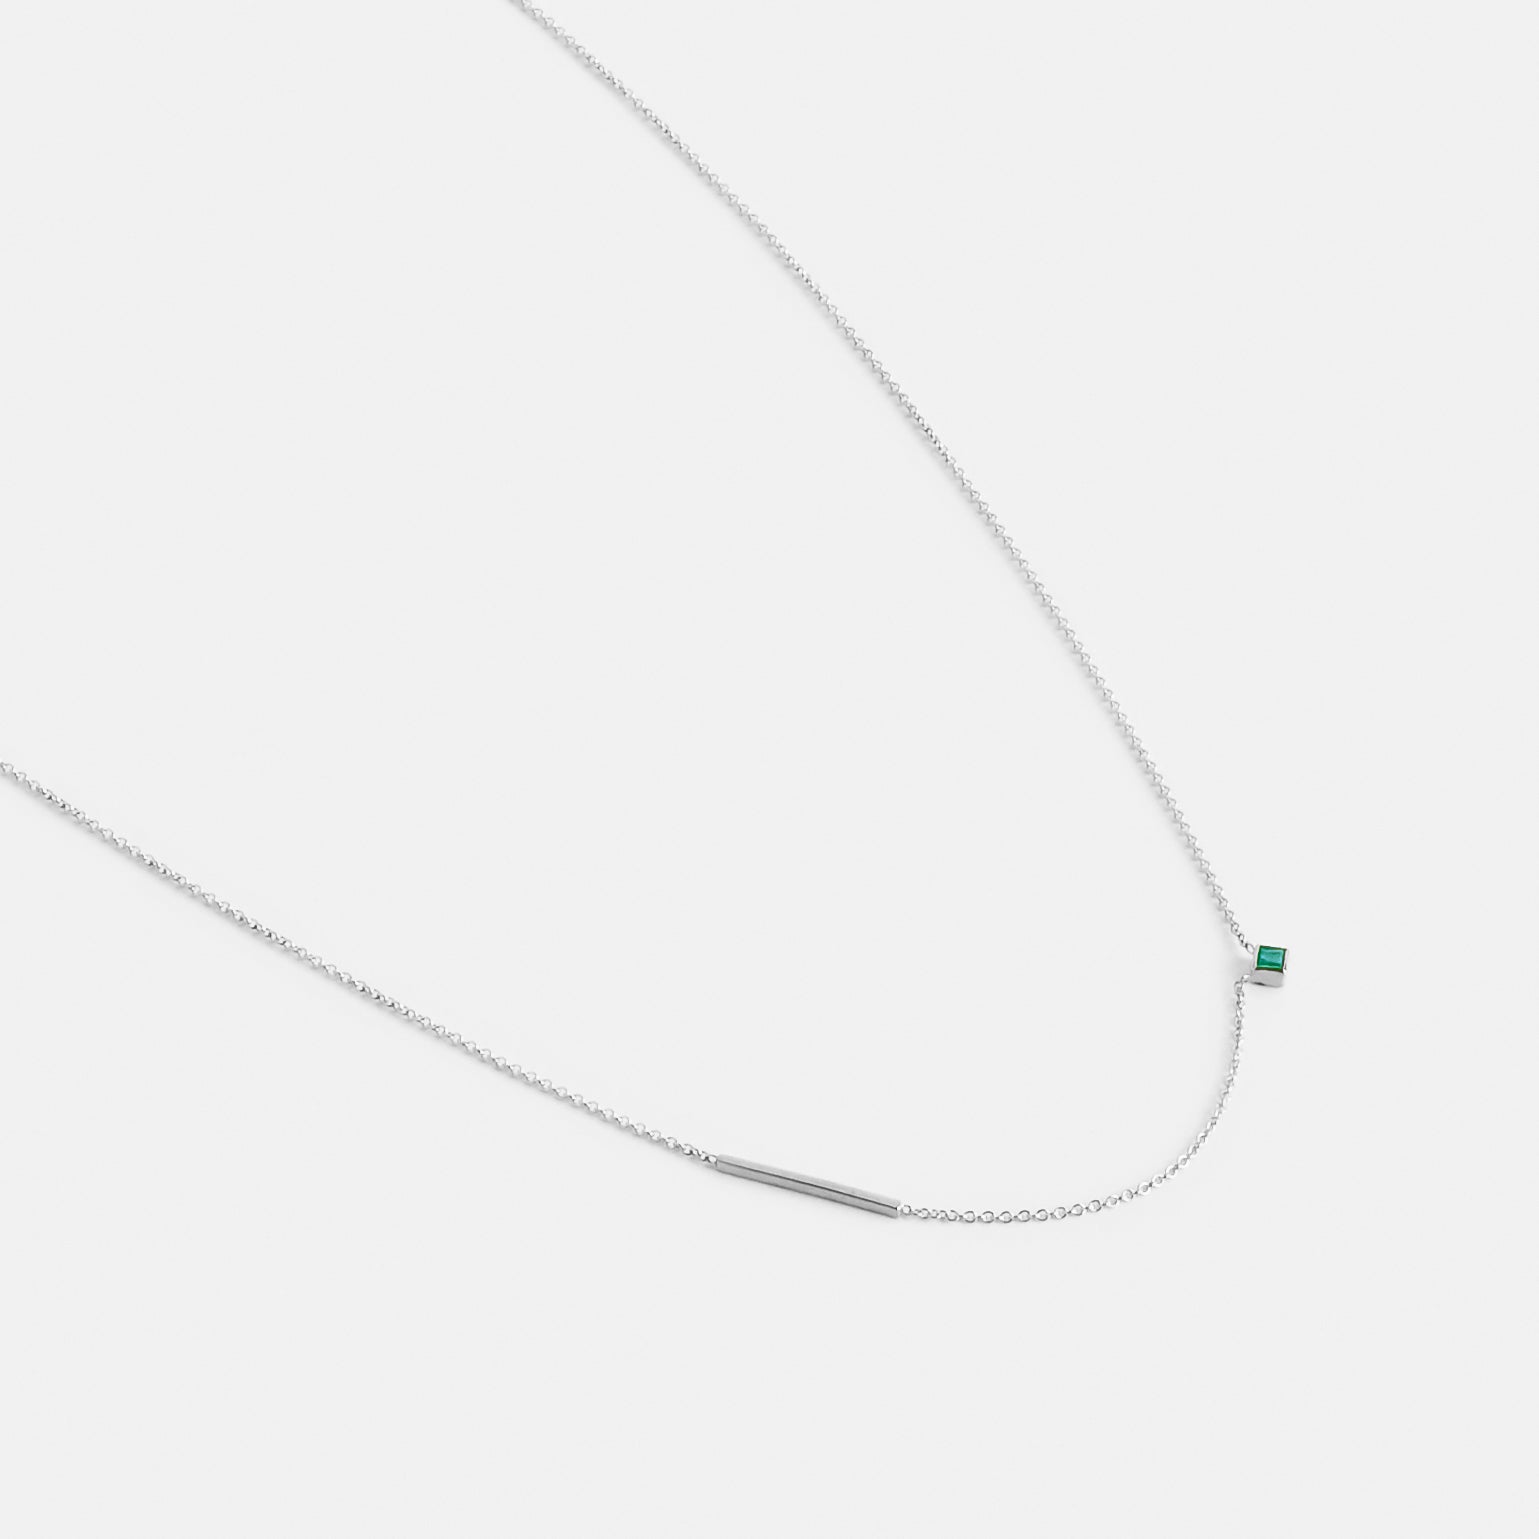 Inu Minimalist Necklace in 14k White Gold Set with Emerald By SHW Fine Jewelry NYC